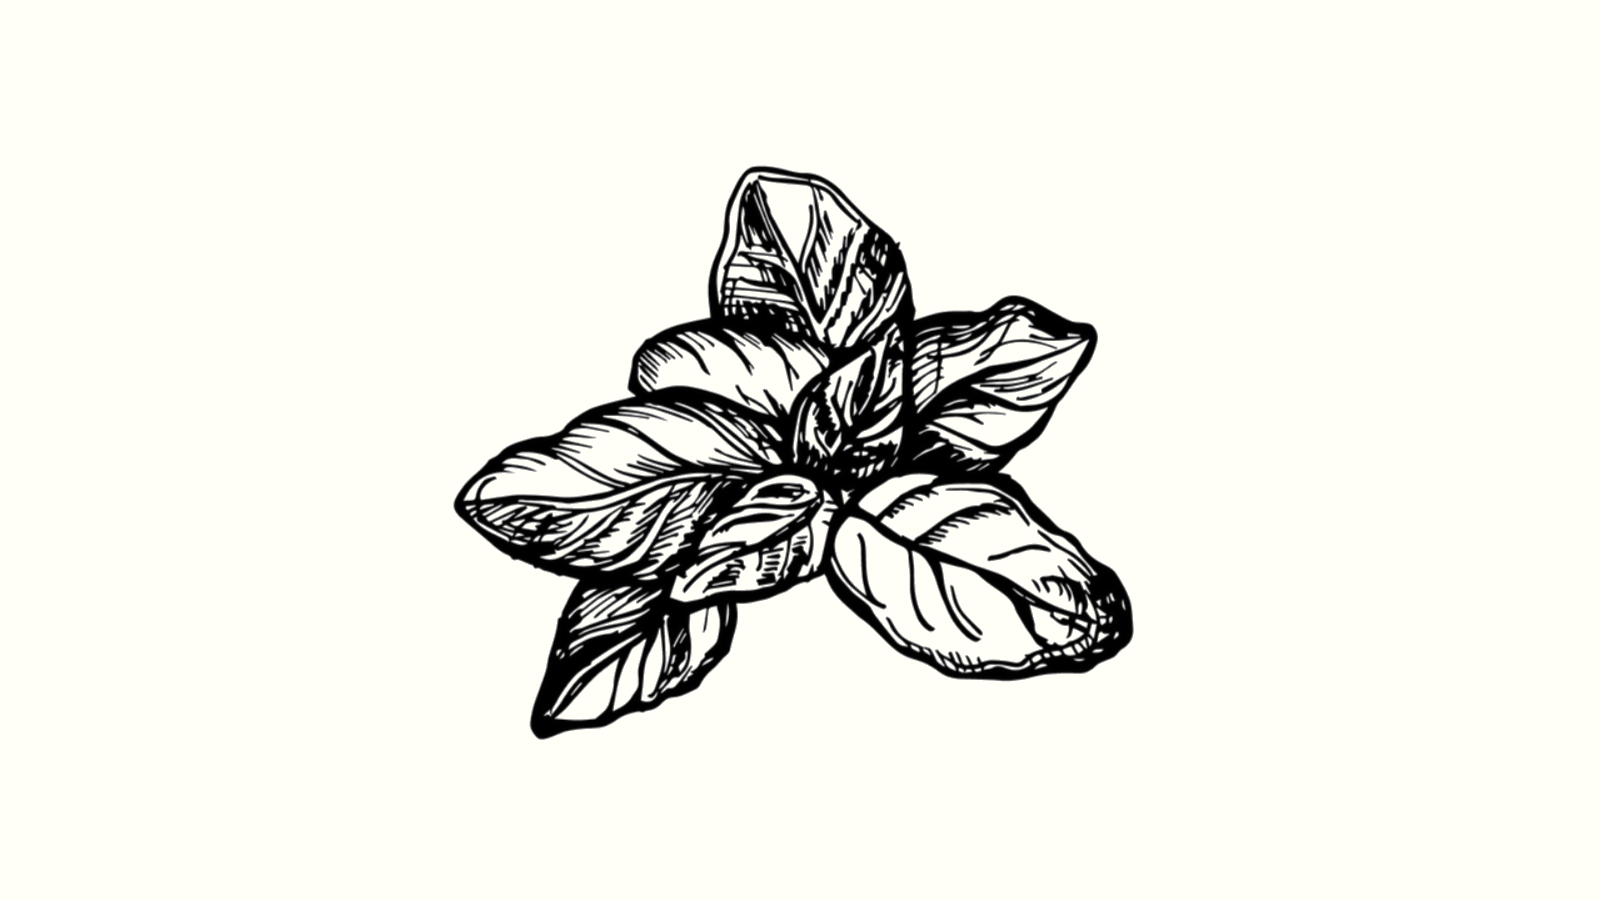 A black and white drawing of basil leaves.